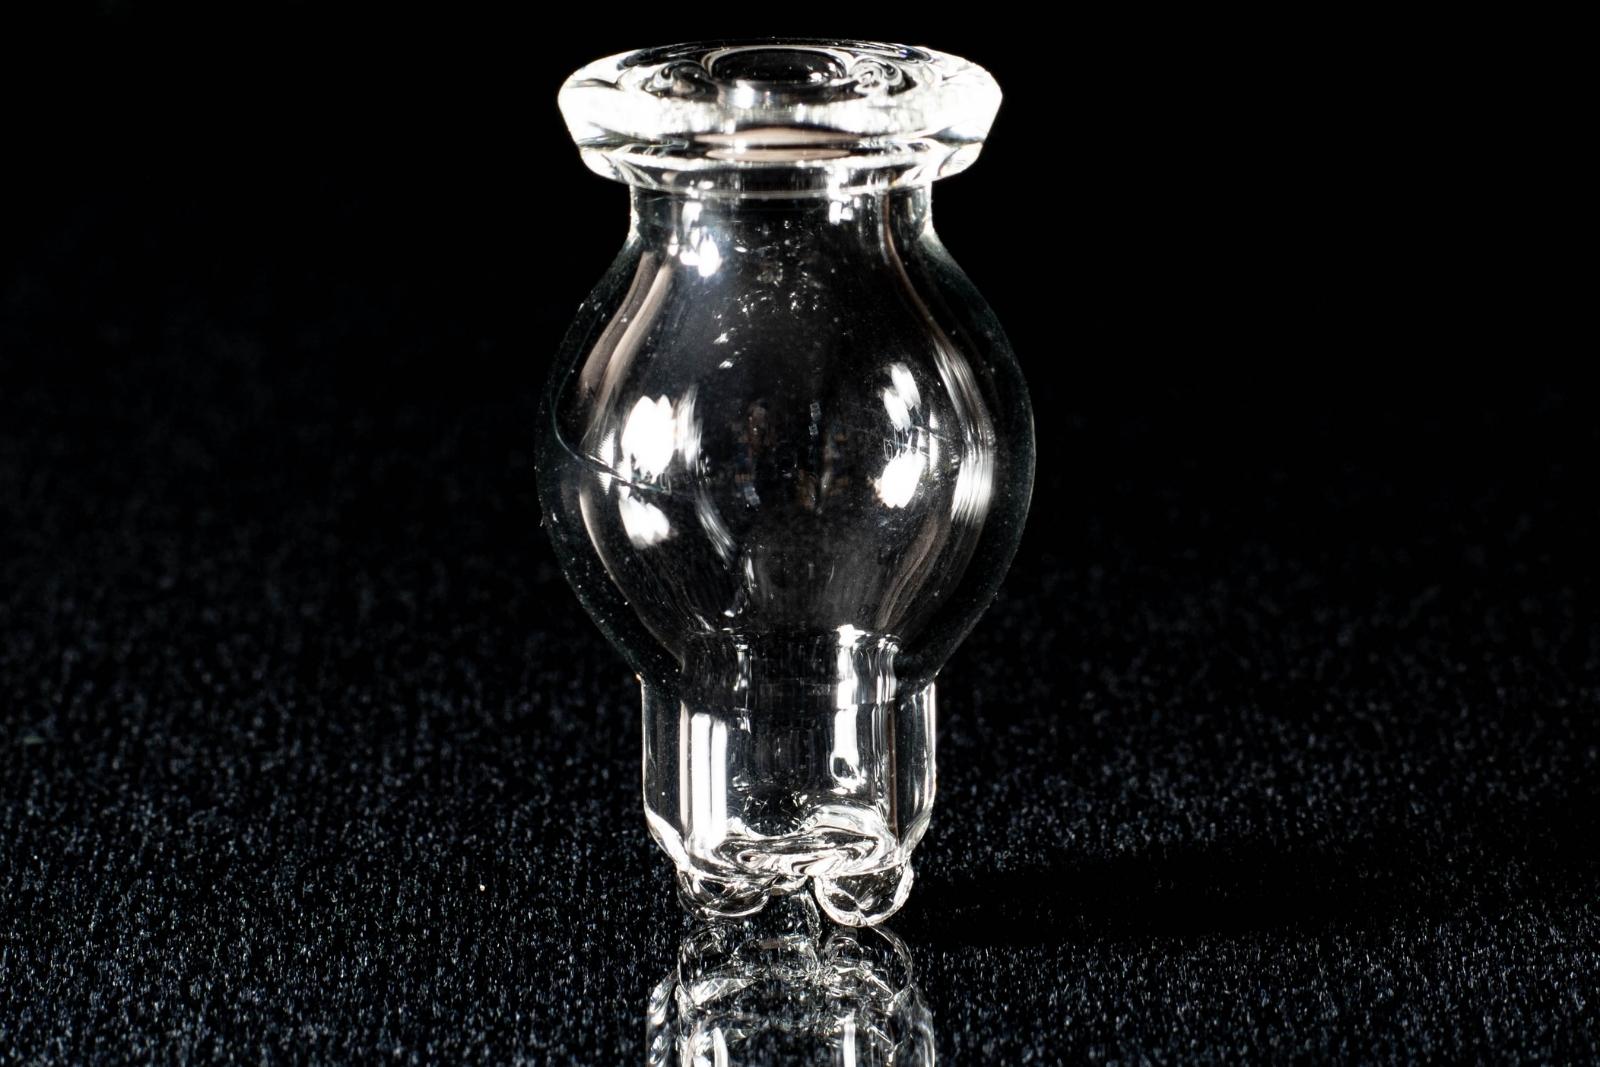 A clear spinner bubble cap, made by BorOregon, on a black background